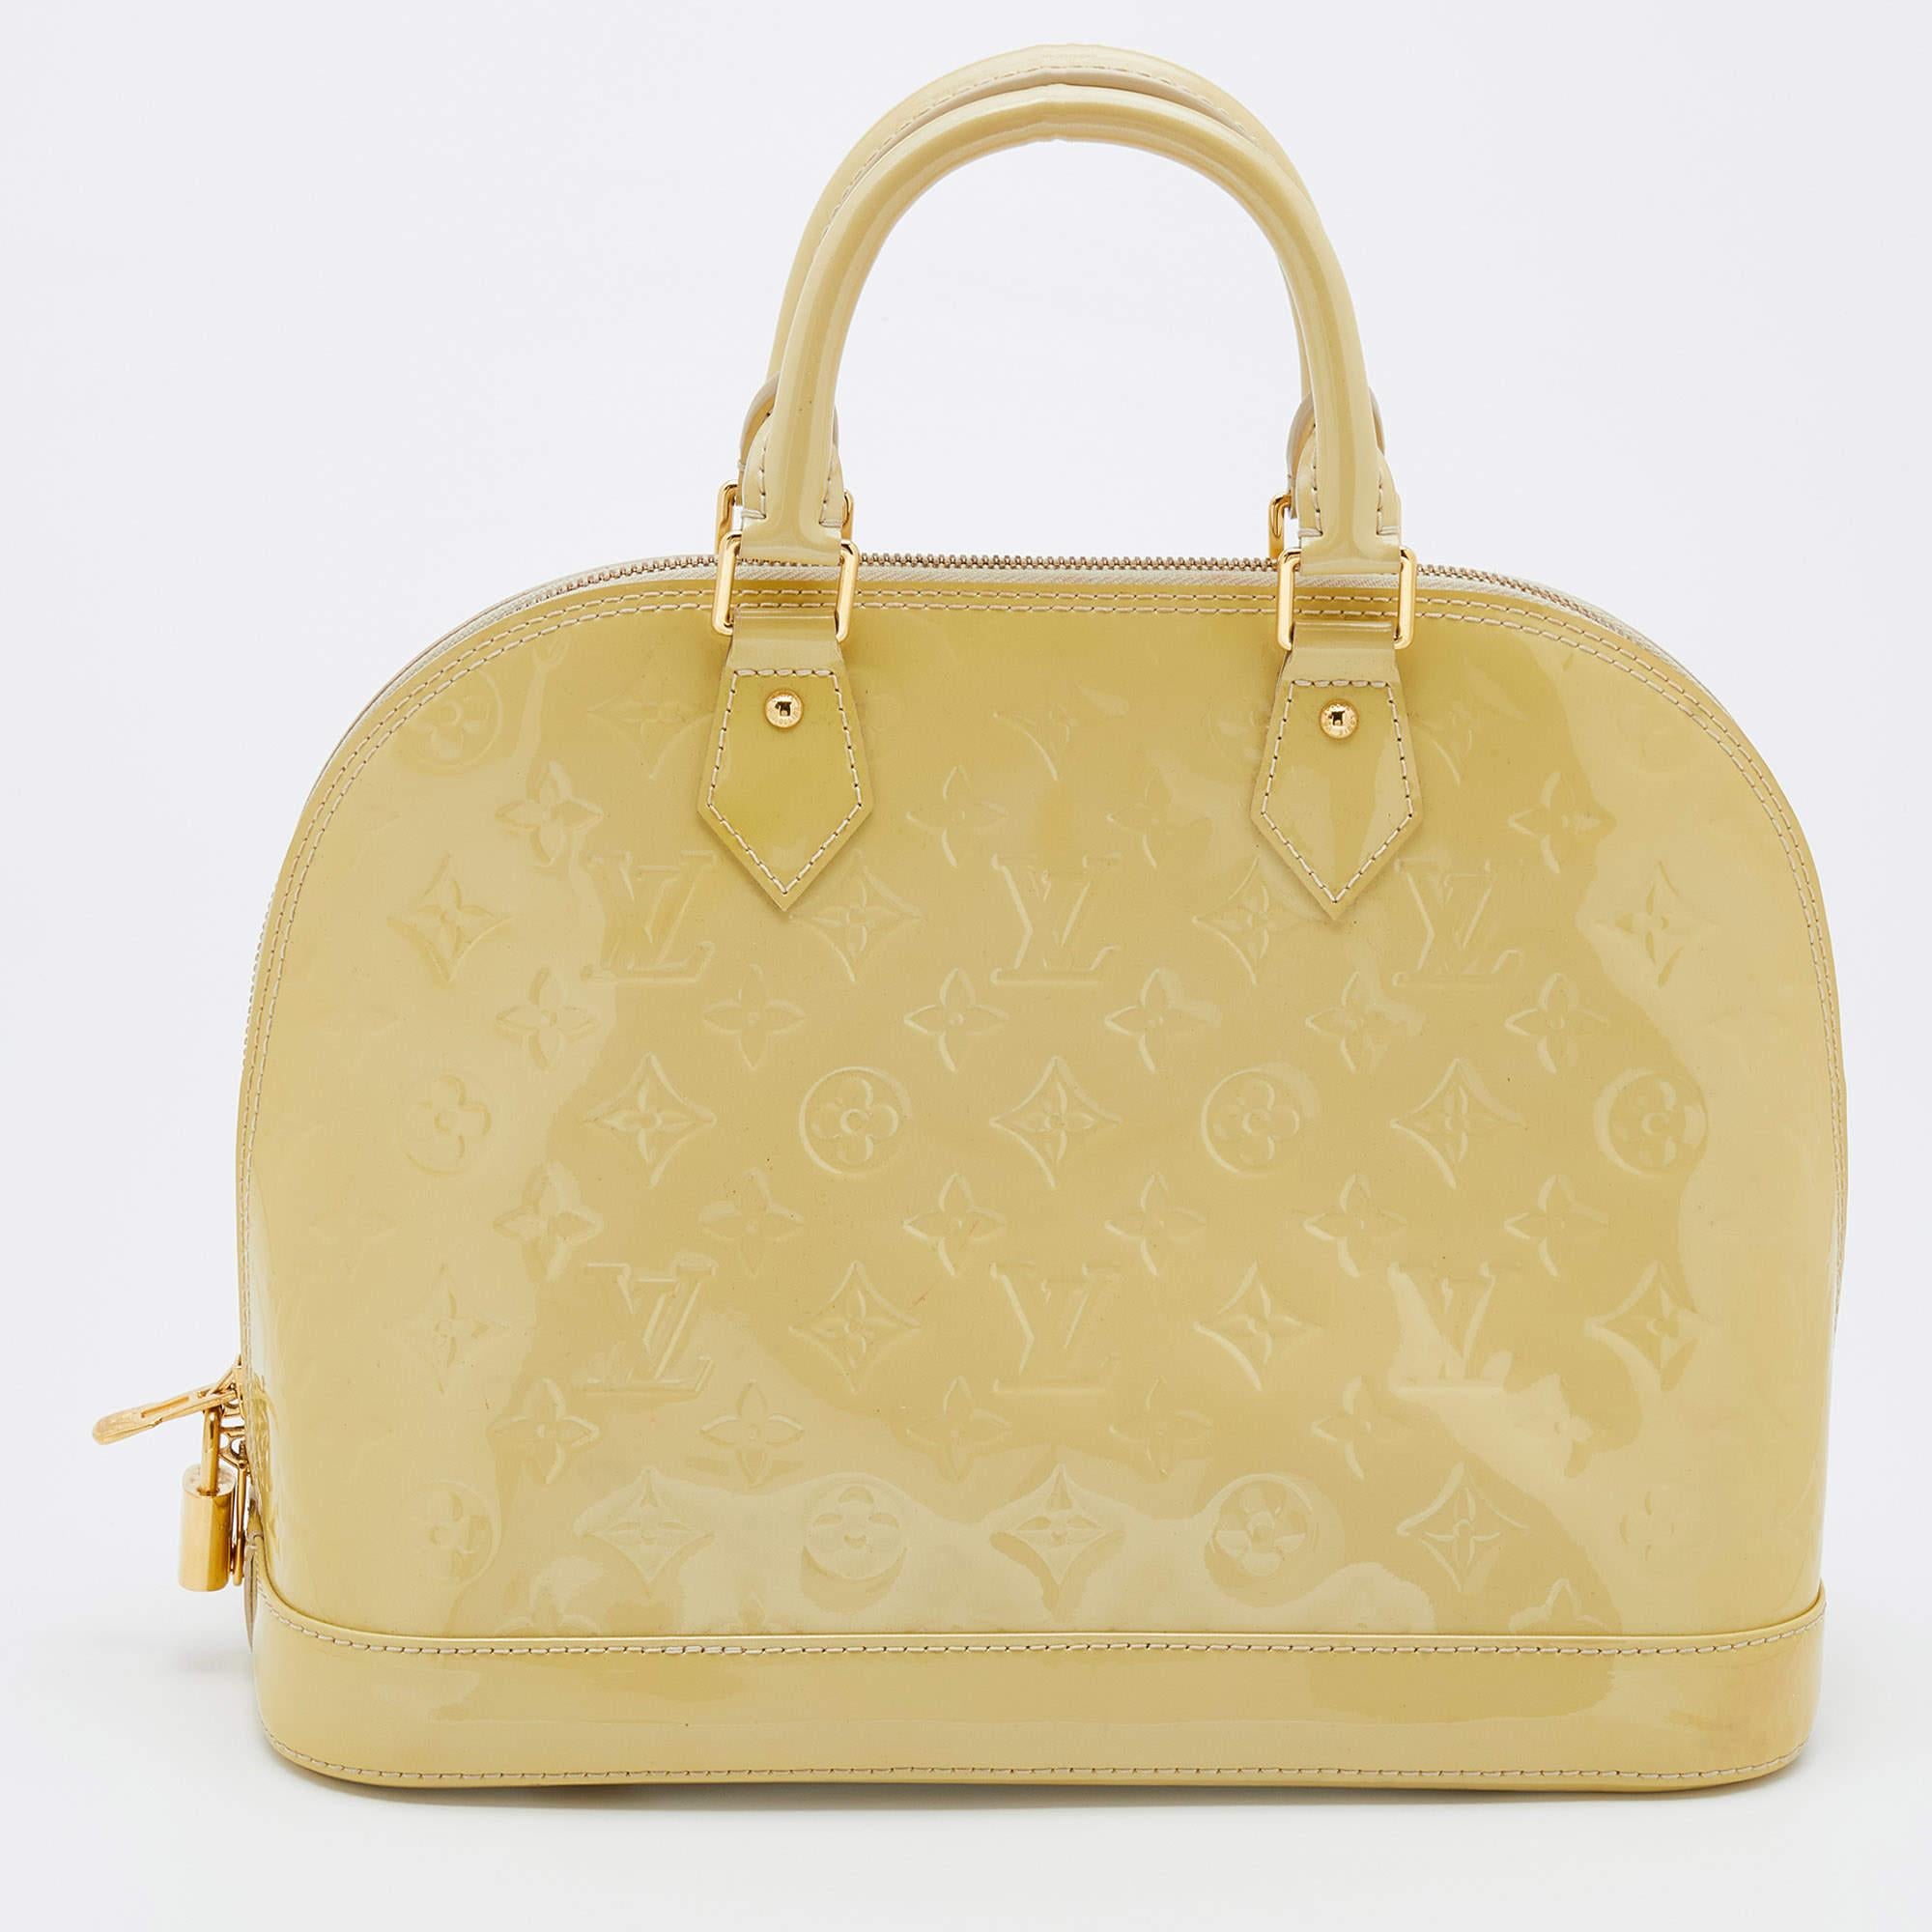 Out of all the irresistible handbags from Louis Vuitton, the Alma is the most structured one. This Alma PM bag is globally popular and admired even today. This elegant bag highlights your impeccable styling choices and meets your practical demands.